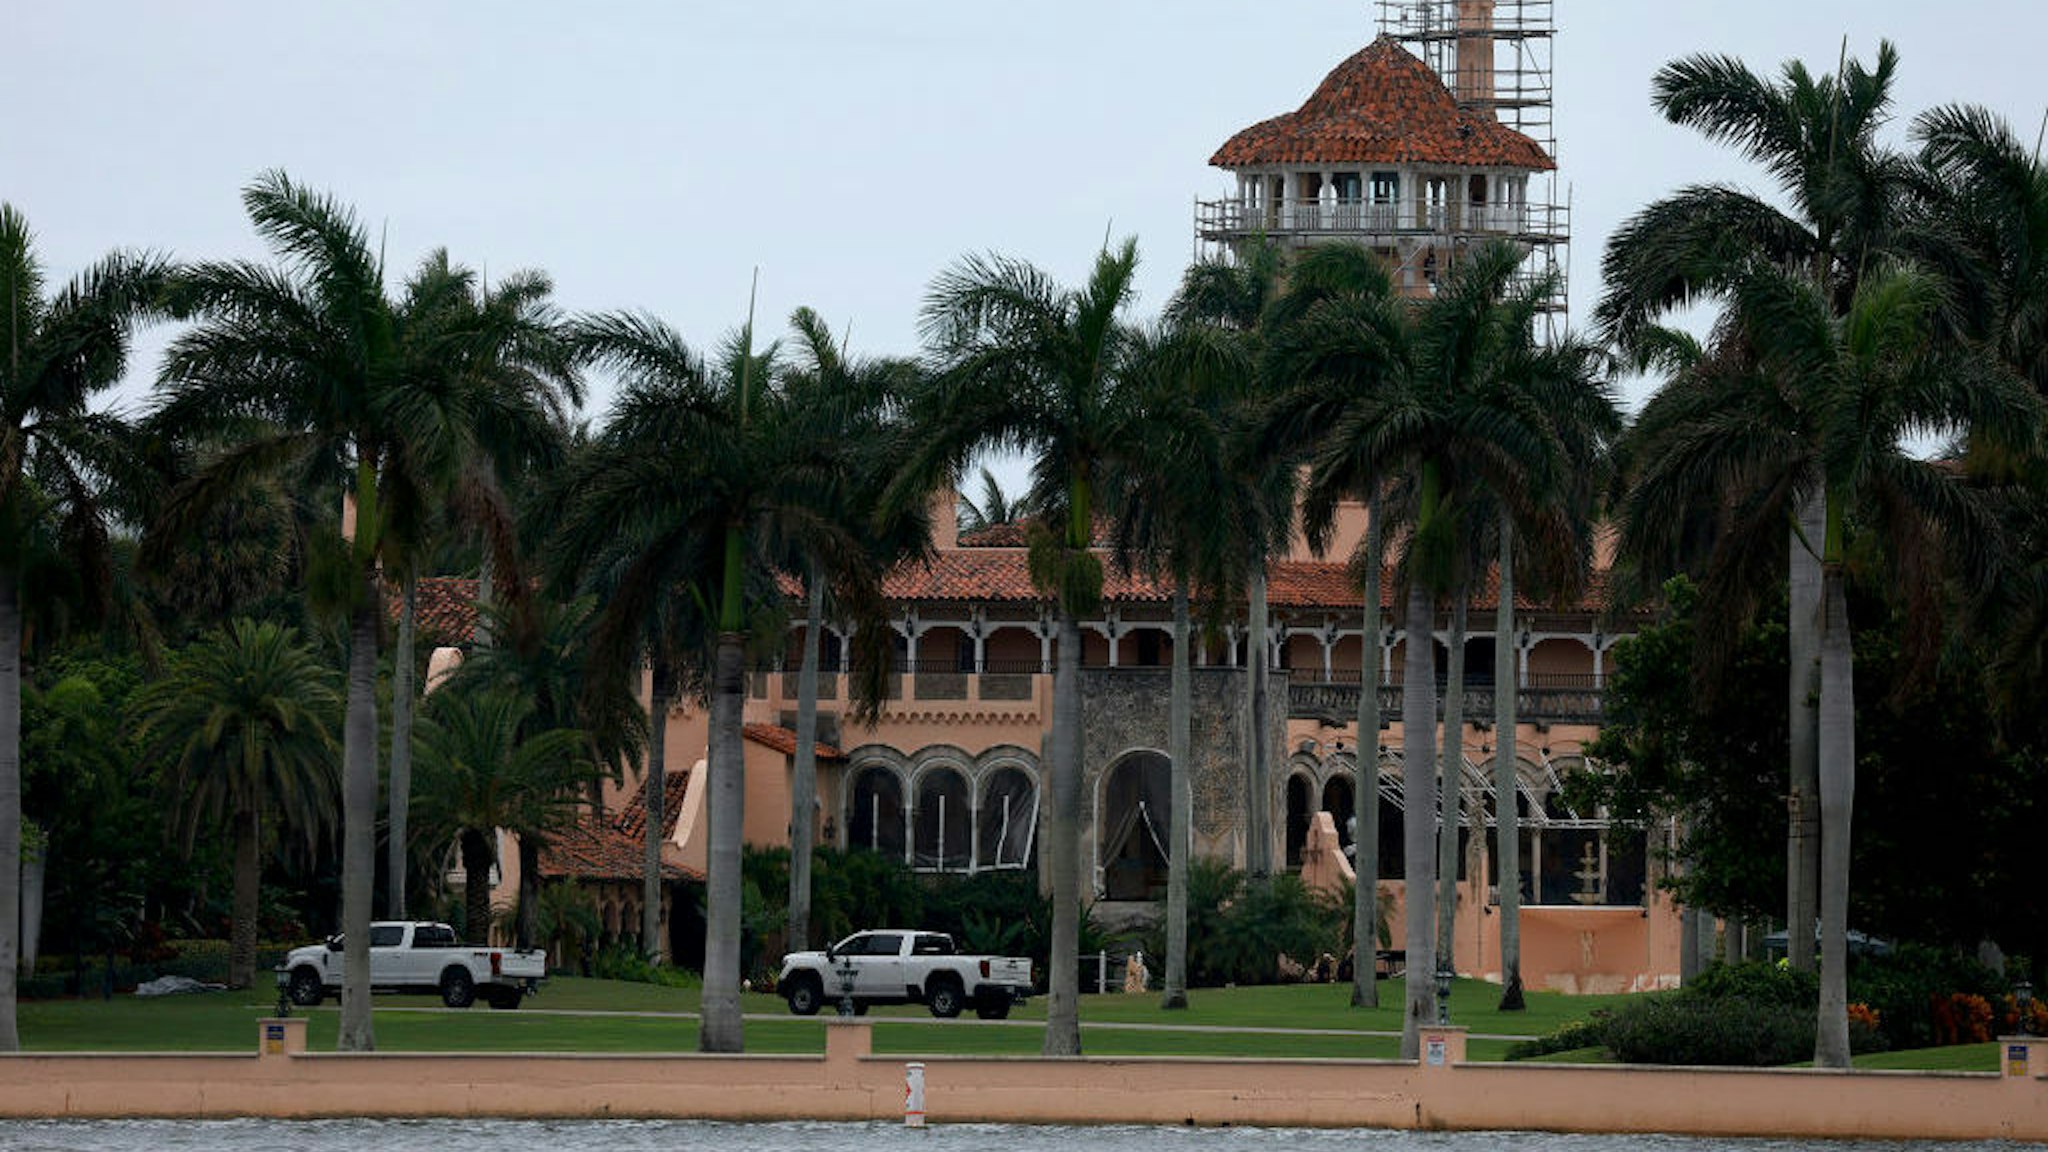 PALM BEACH, FLORIDA - JUNE 08: Former U.S. President Donald Trump's Mar-a-Lago estate is seen on June 08, 2023 in Palm Beach, Florida. Reports indicate that the Department of Justice is preparing to ask a grand jury to indict former president Donald Trump for violating the Espionage Act and for obstruction of justice after documents, with some marked Top Secret, were seized when the FBI searched the estate. (Photo by Joe Raedle/Getty Images)